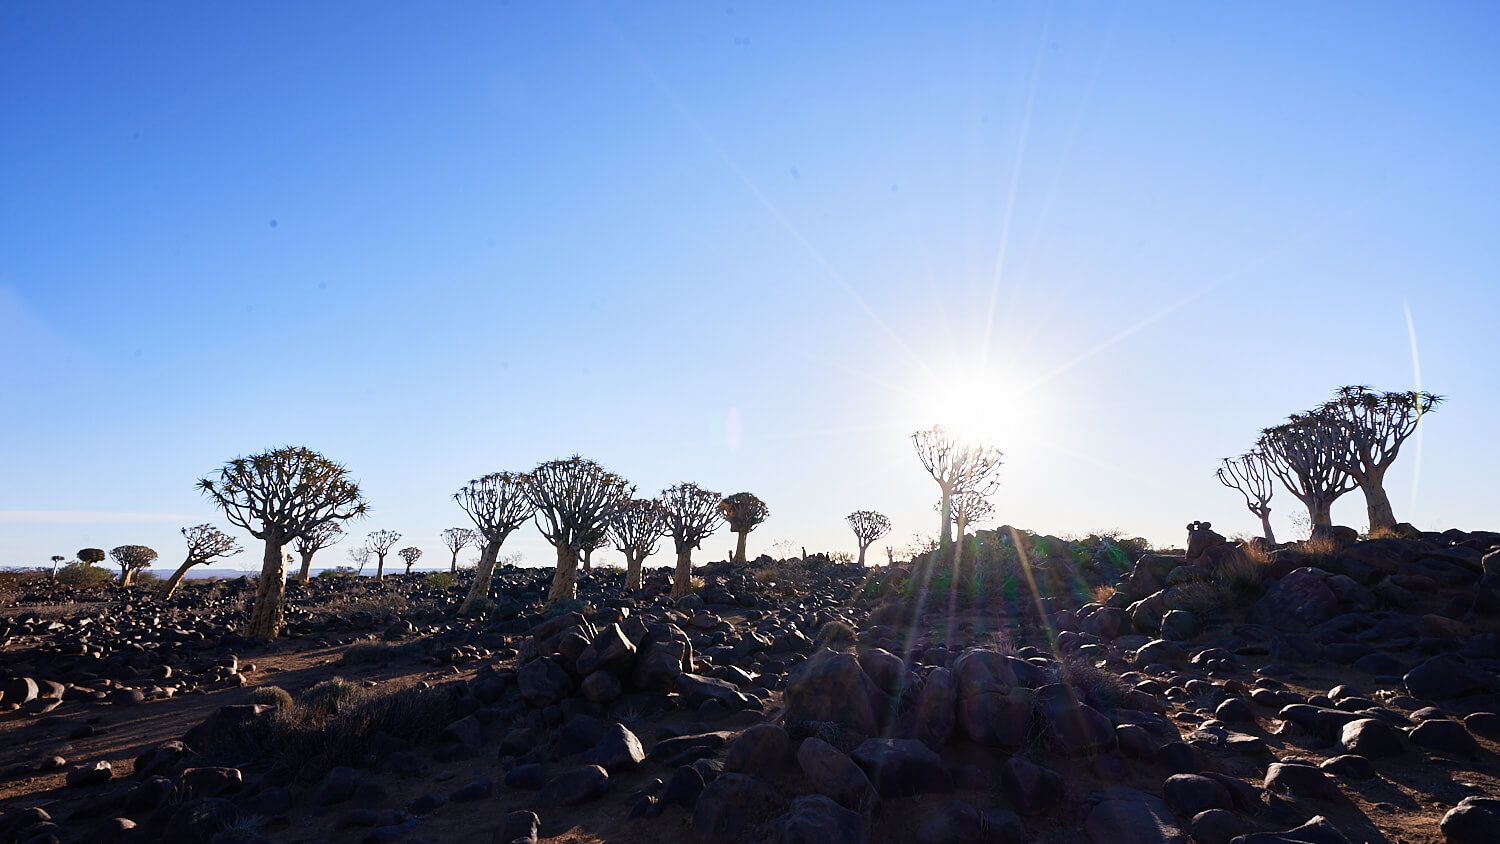 The picture shows the Quivertree forest in the backlight